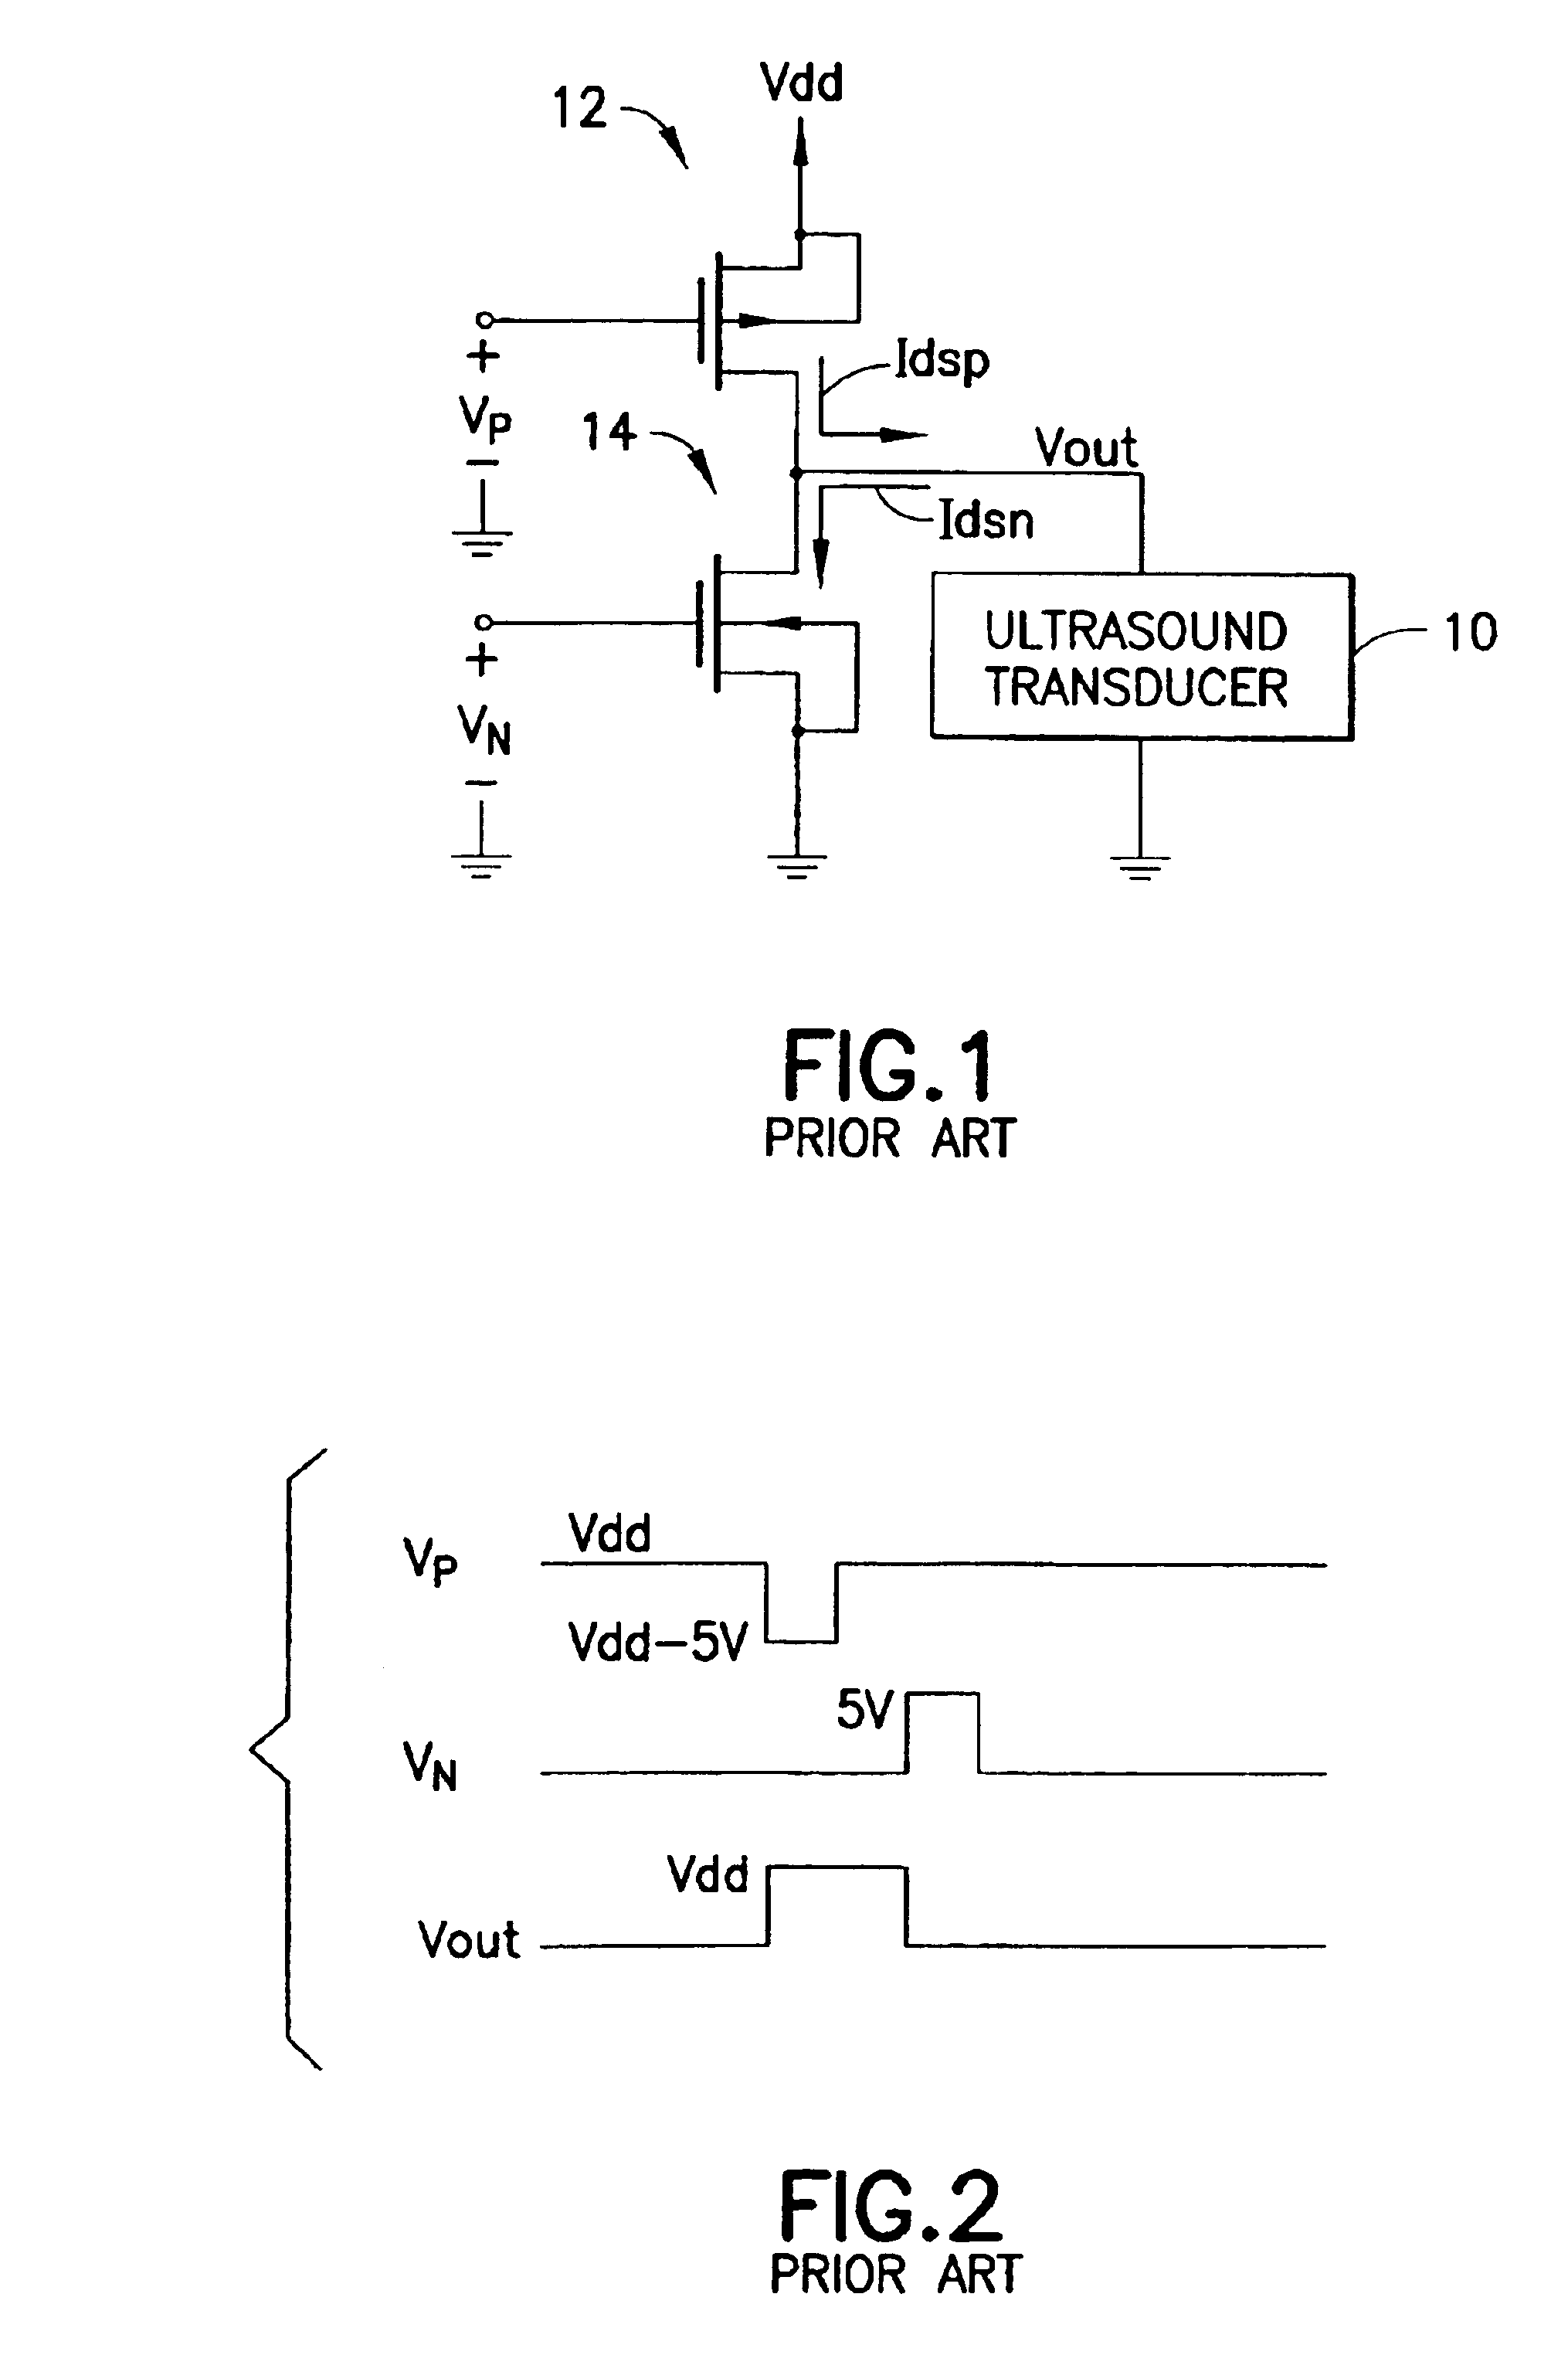 Ultrasound transmitter with voltage-controlled rise/fall time variation